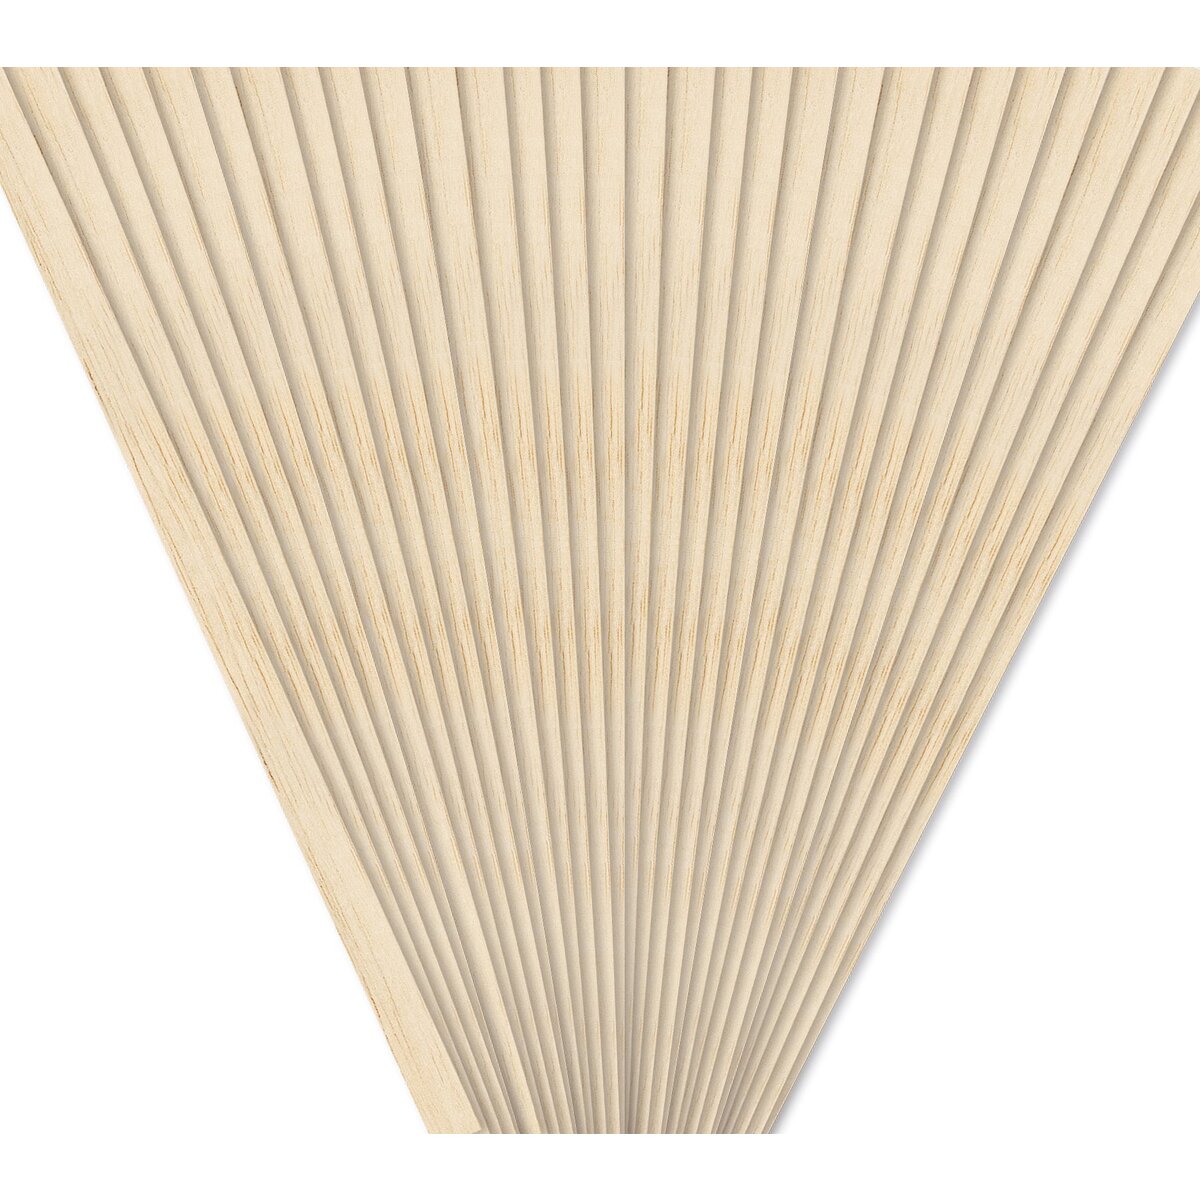 Midwest Products Genuine Balsa Wood Strips- 10 Pieces, 1/4 x 1/4 x 36